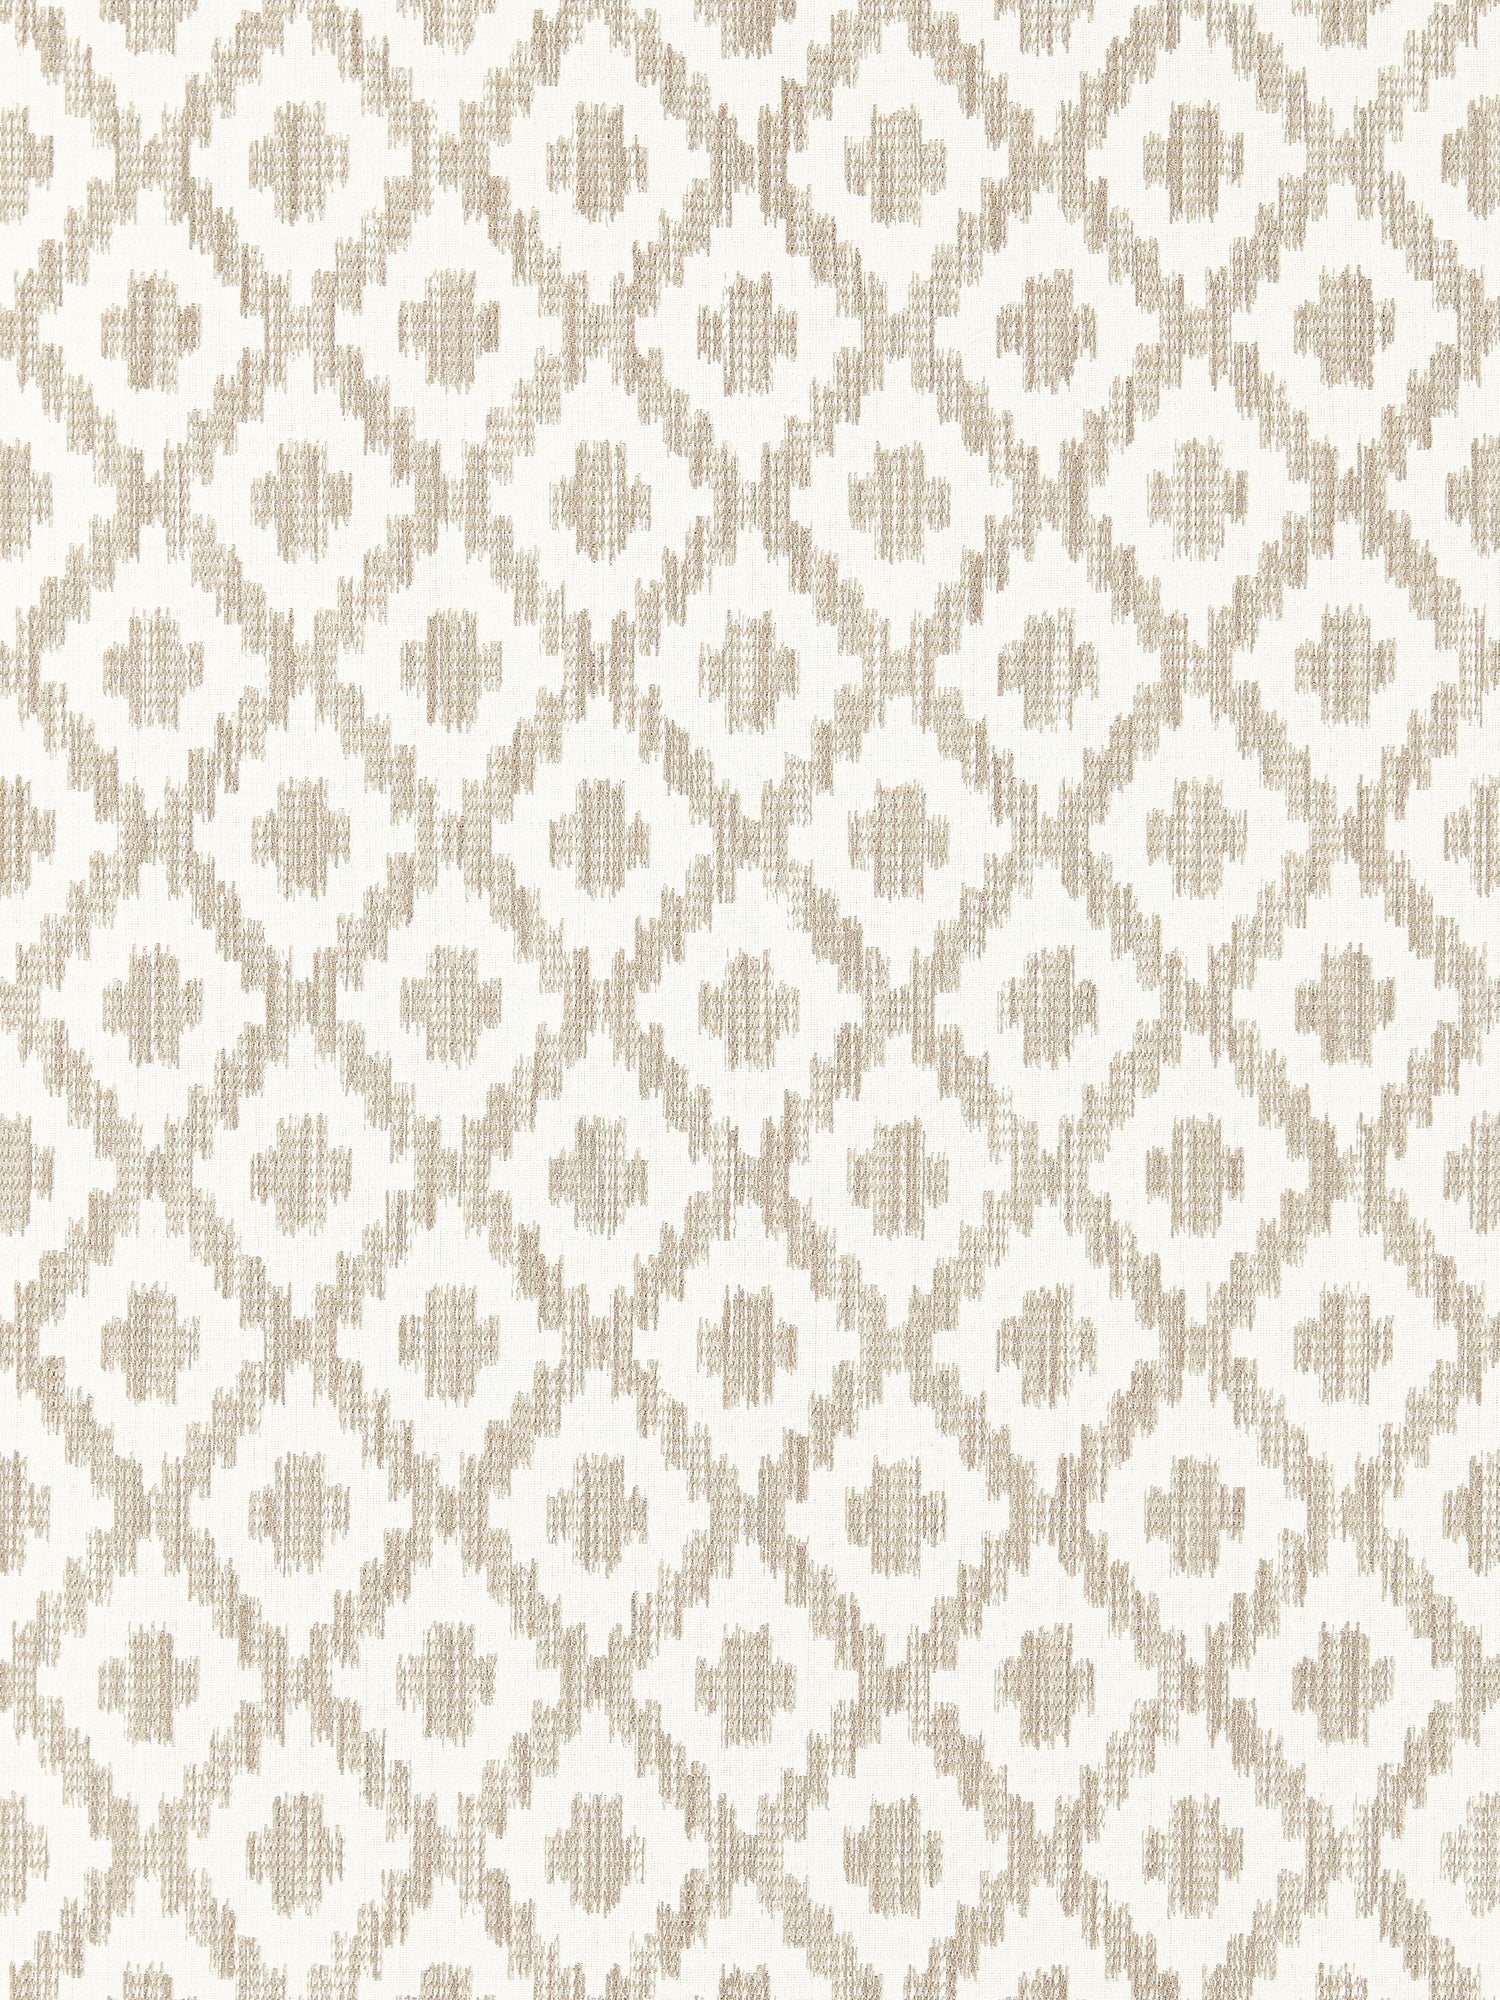 Malay Ikat Weave fabric in flax color - pattern number SC 000127098 - by Scalamandre in the Scalamandre Fabrics Book 1 collection